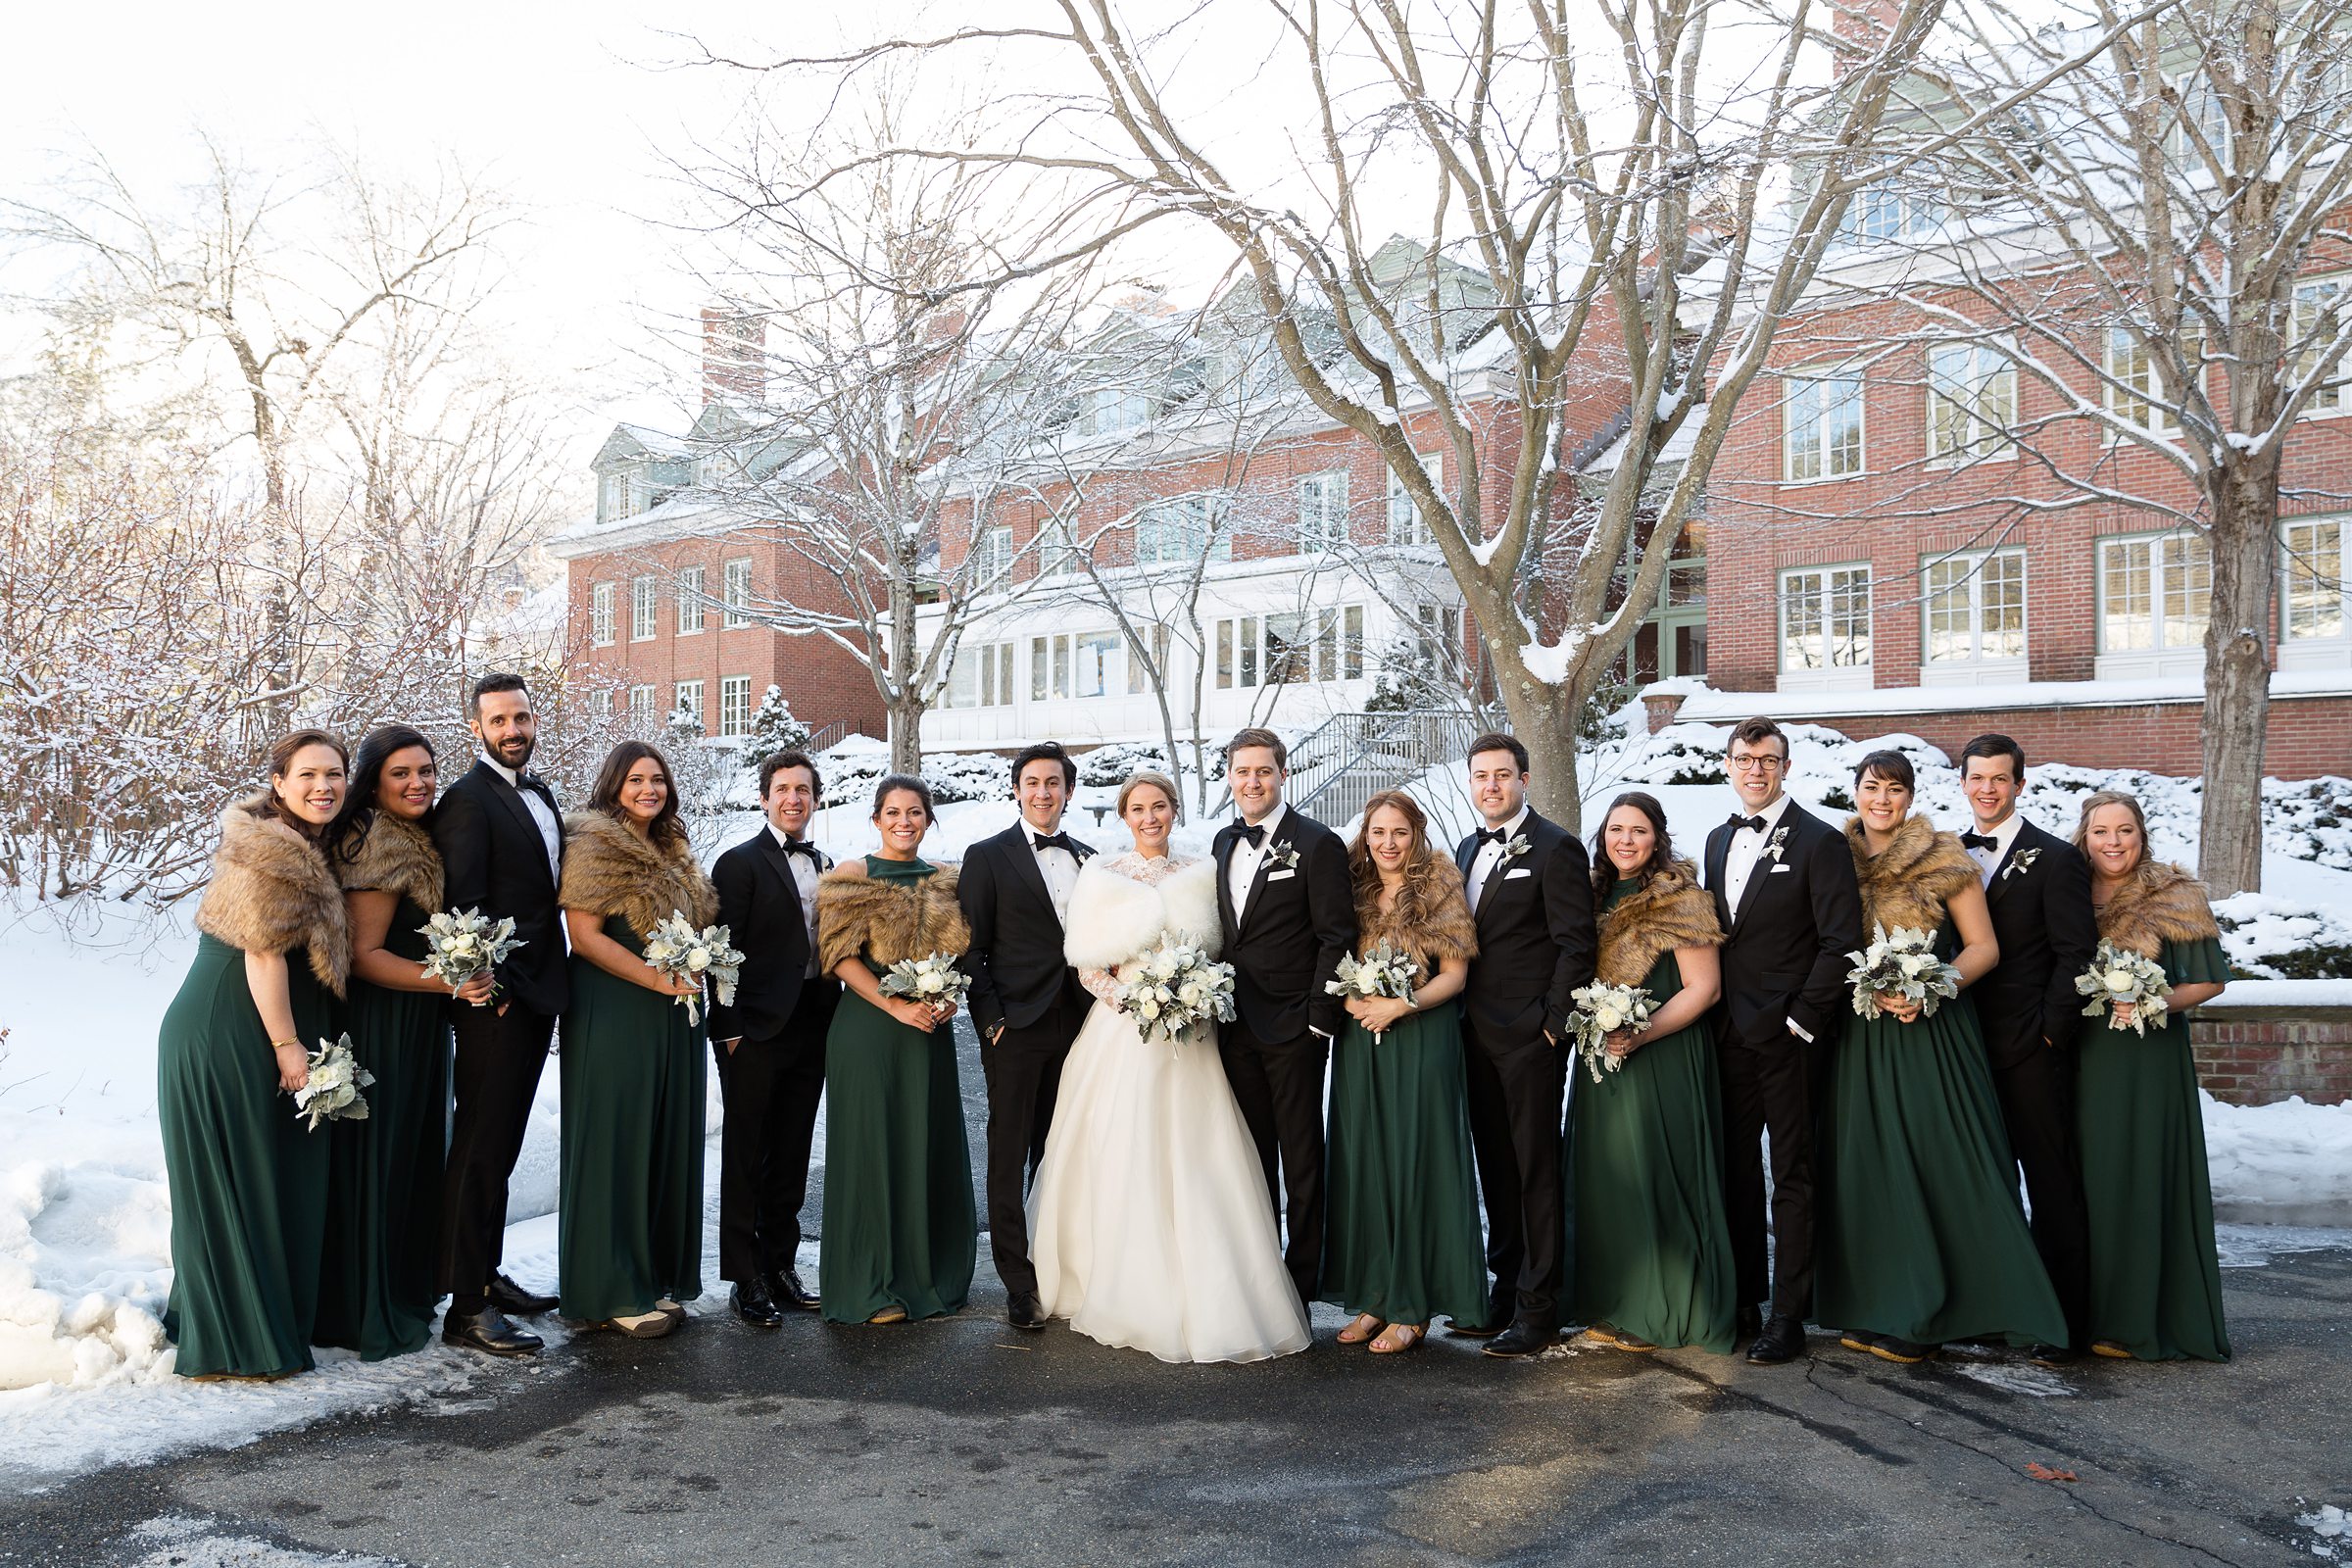 Bridal party photography at the Woodstock Inn 